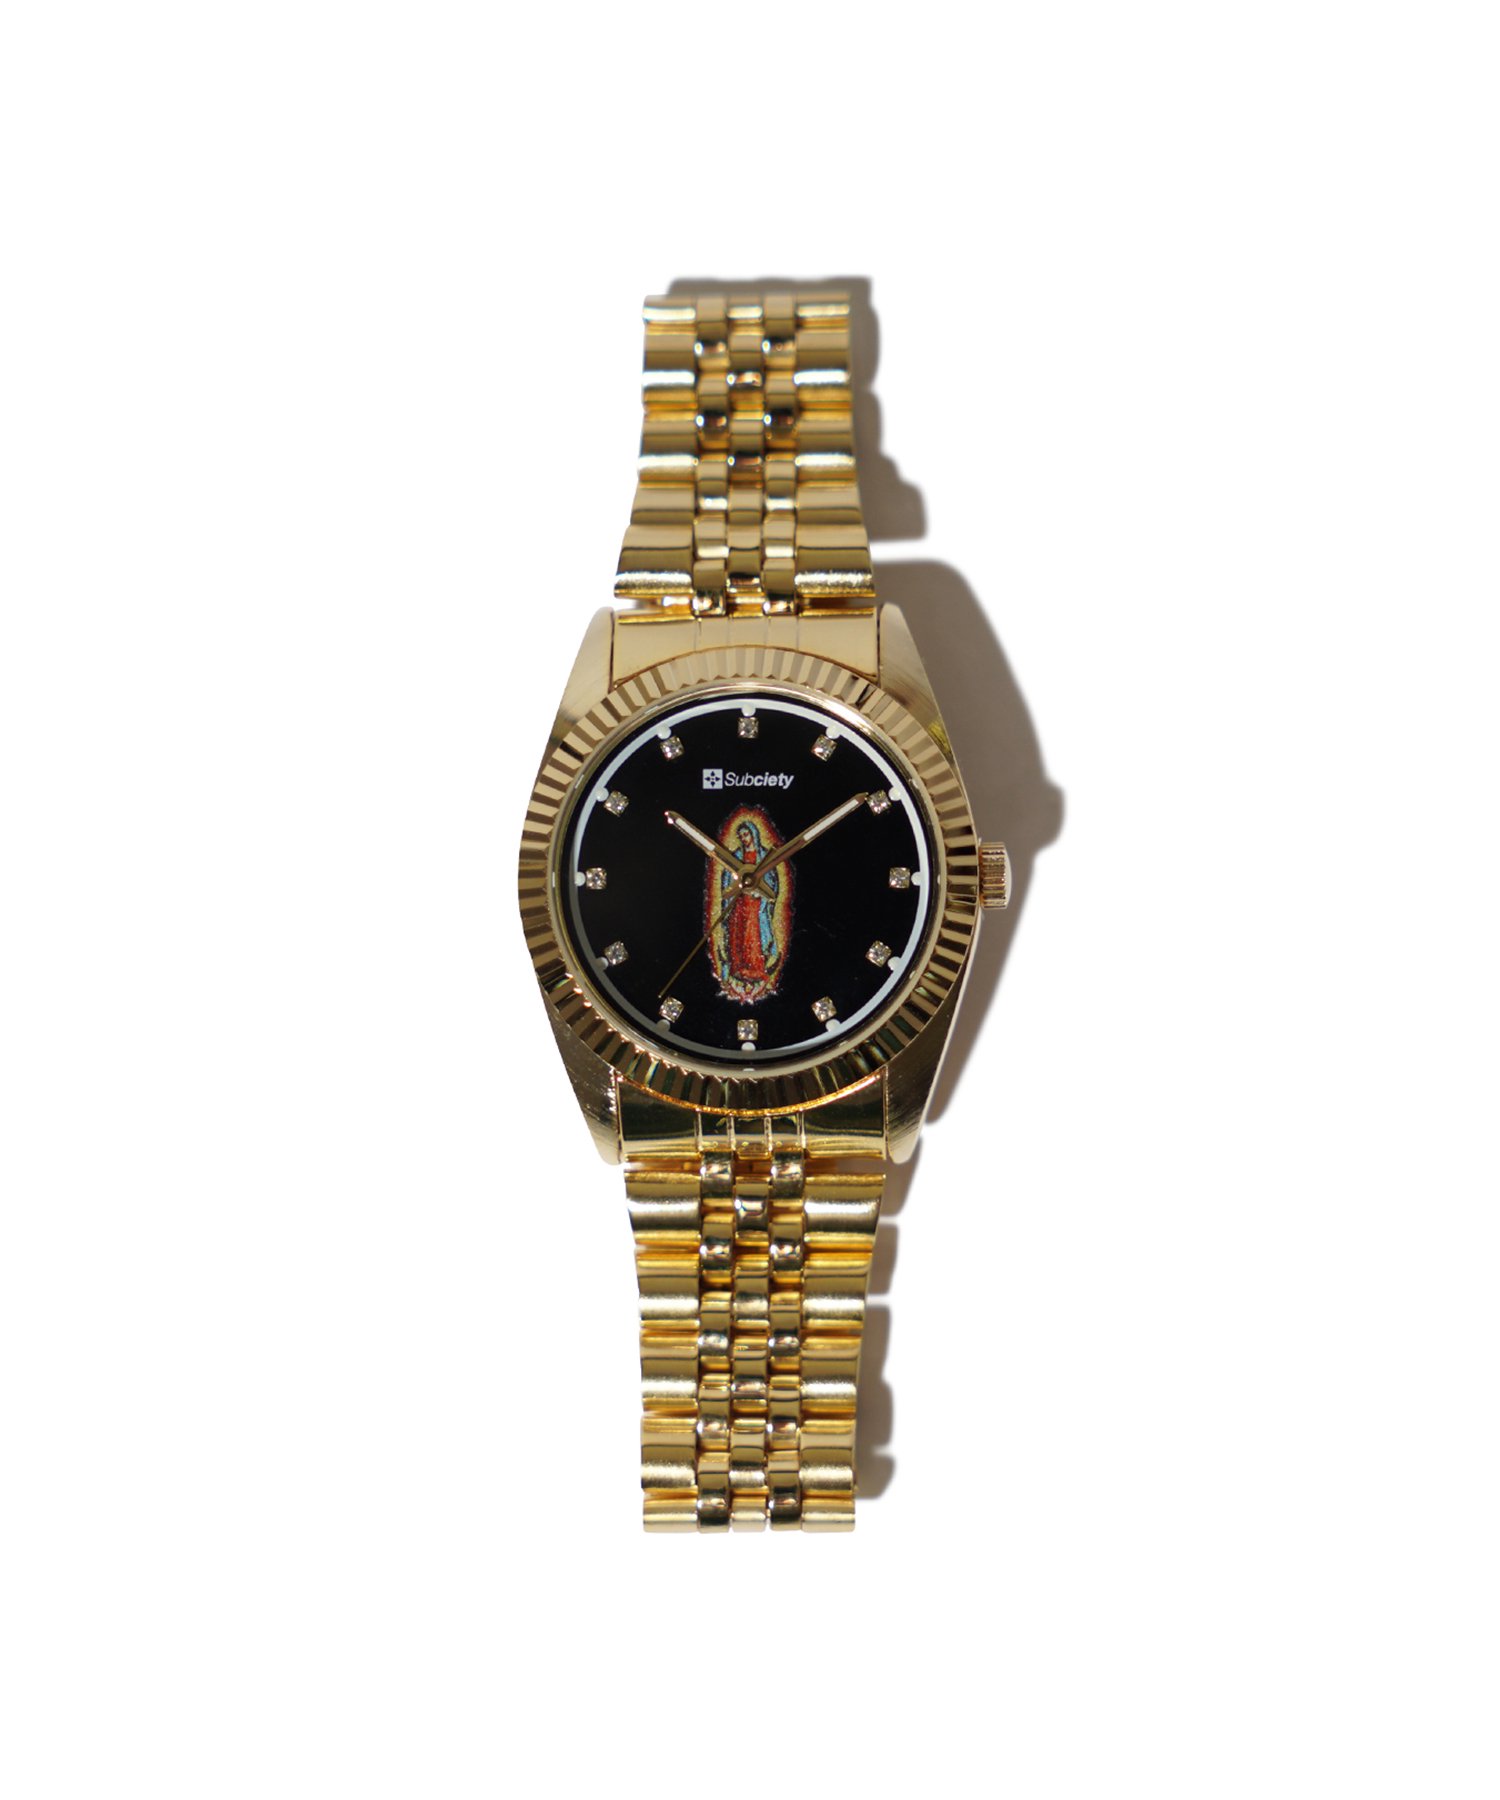 MARIA WATCH - Subciety Online Store